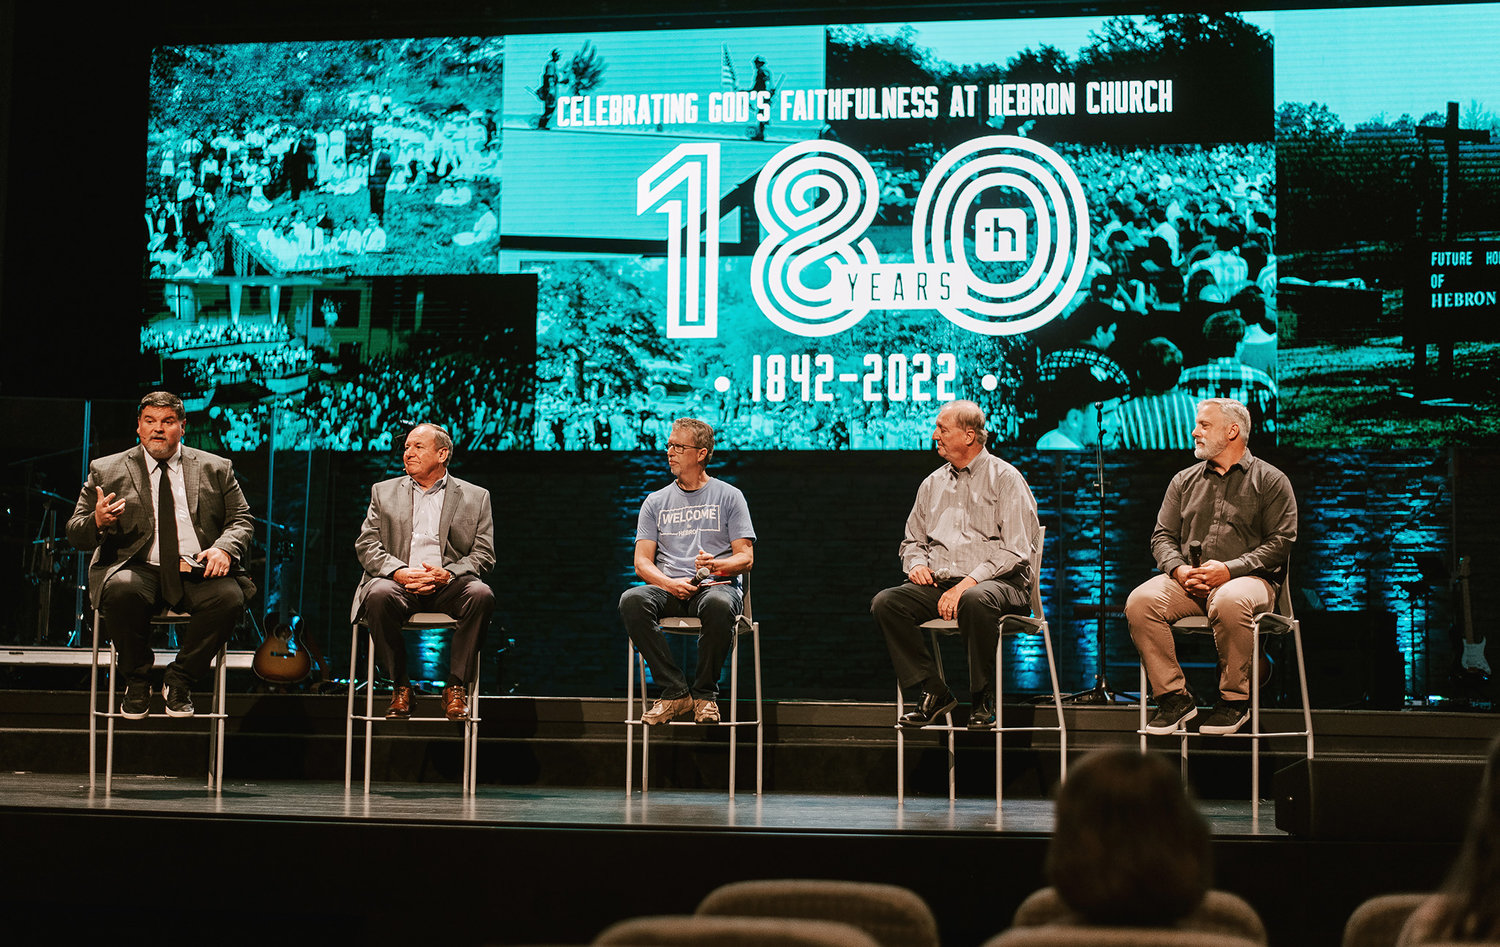 Pastor Landon Dowden speaks during a panel discussion Sunday, July 3, 2022, on the 180th anniversary of Hebron Baptist Church in Dacula, Ga., From left: Dowden, former Pastor Larry Wynn (1978-2011), Associate Pastor John Williams, former Interim Pastor Steve Parr (2018) and former Pastor Kevin Miller (2011-2017). (Photo/Hebron Baptist Church)